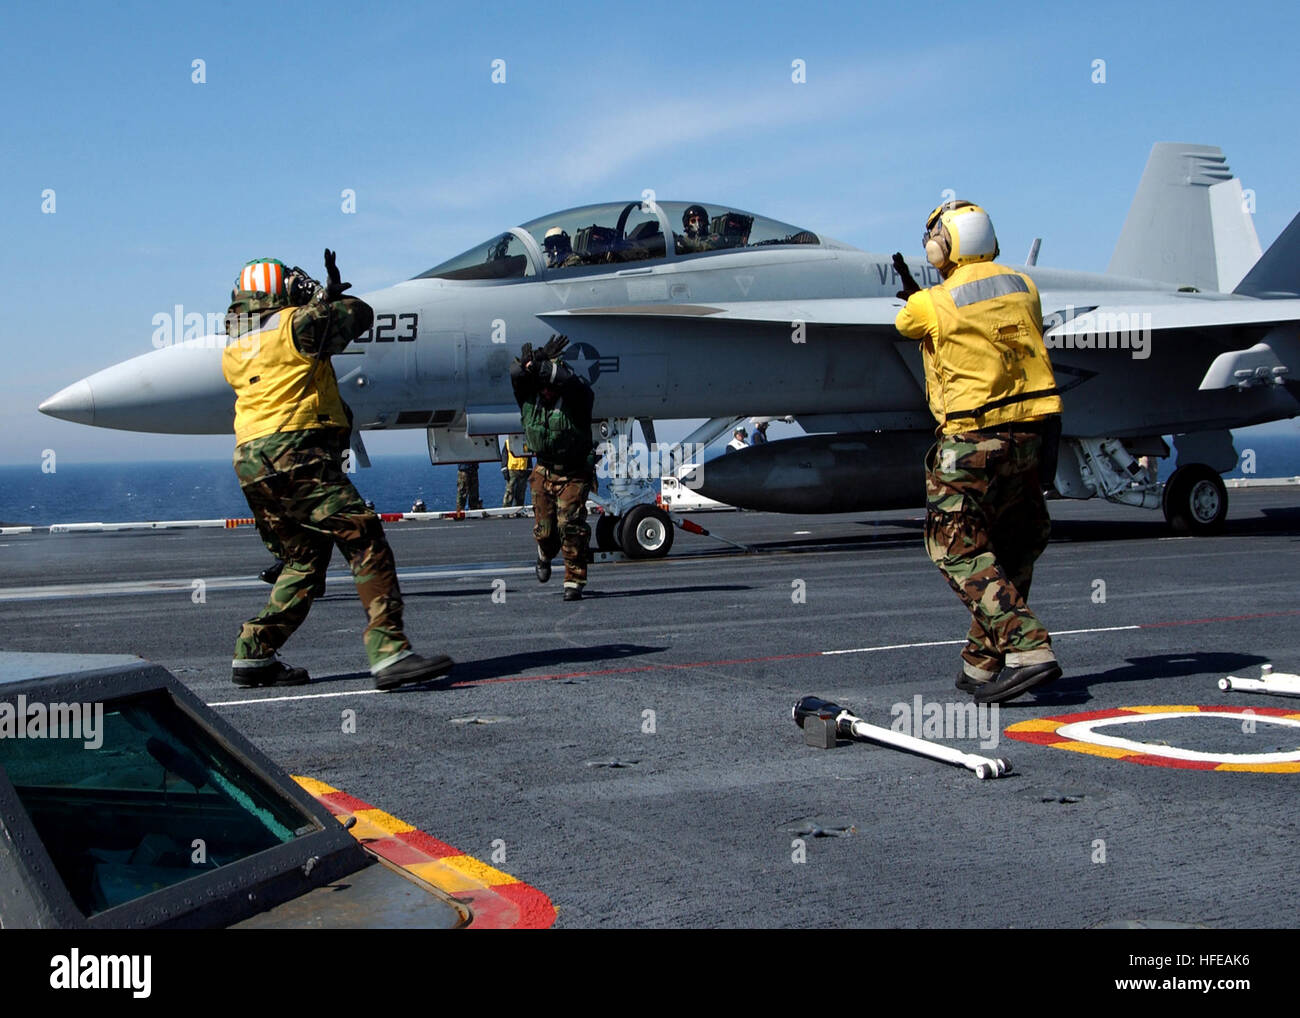 050307-N-2838C-001 Atlantic Ocean (Mar. 7, 2005) Ð Air Department personnel signal a fouled deck before the launch of an F/A-18F Super Hornet, assigned to the 'Gladiators' of Strike Fighter Squadron One Zero Six (VFA-106) during flight operations aboard USS Theodore Roosevelt (CVN 71). VFA-106 is the Atlantic Fleet Replacement Squadron (FRS) for the F/A-18E/F Super Hornet. Roosevelt is currently conducting Carrier Qualifications in the Atlantic Ocean. U.S. Navy photo by Photographer's Mate Airman Michael D. Cole (RELEASED) US Navy 050307-N-2838C-001 Air Department personnel signal a fouled dec Stock Photo